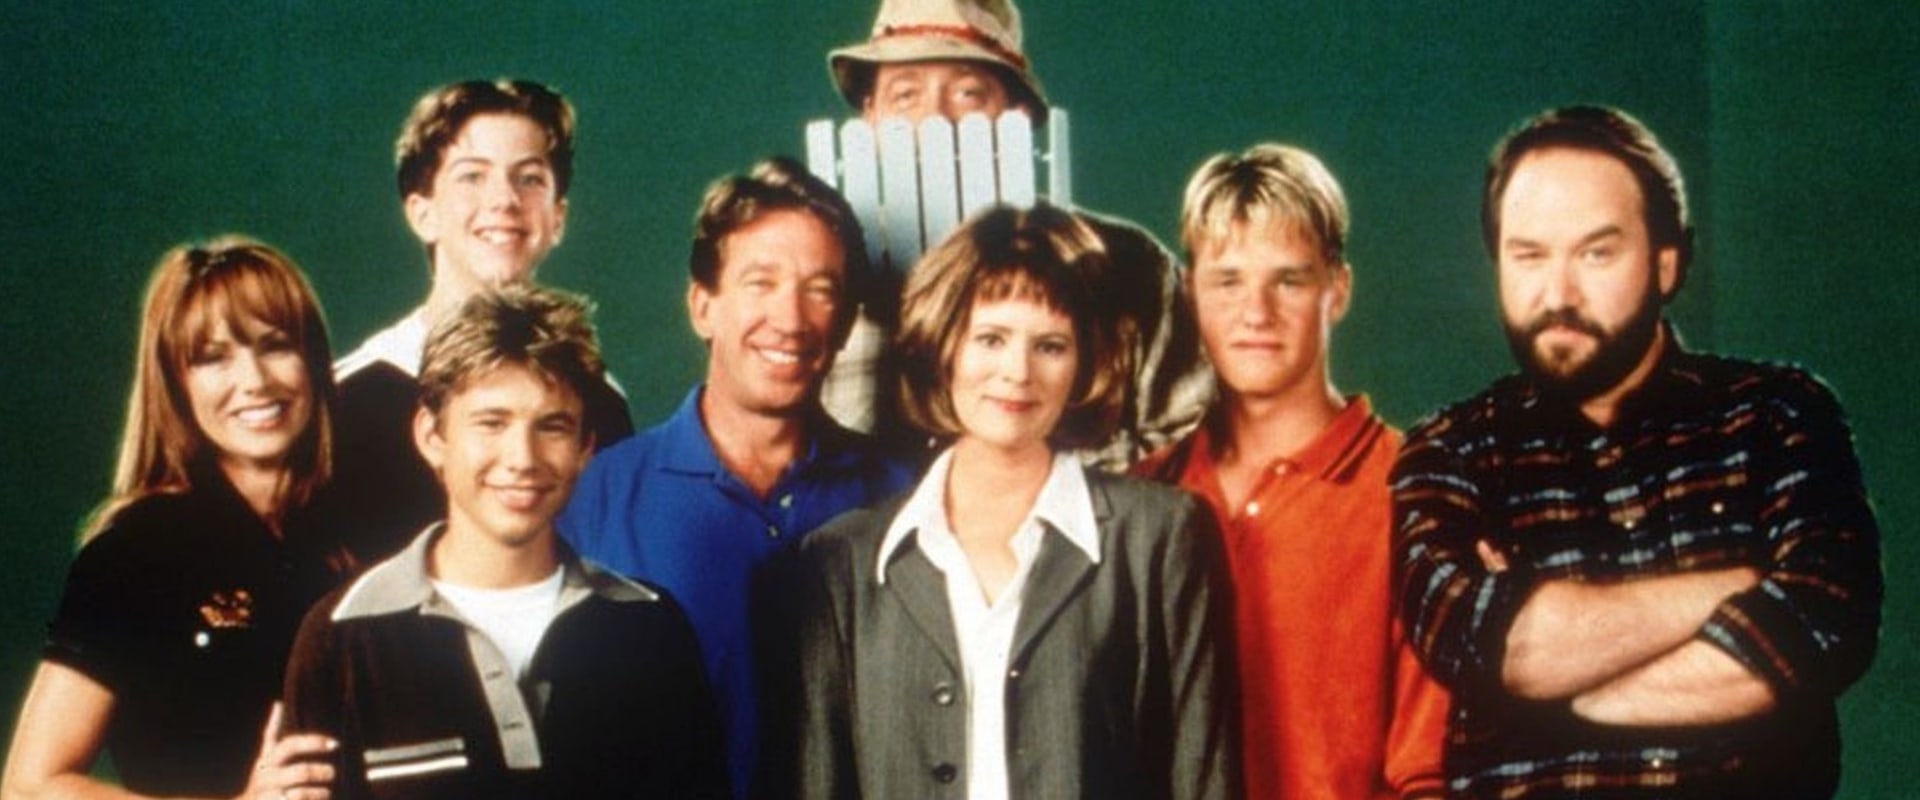 Is home improvement on netflix or hulu?